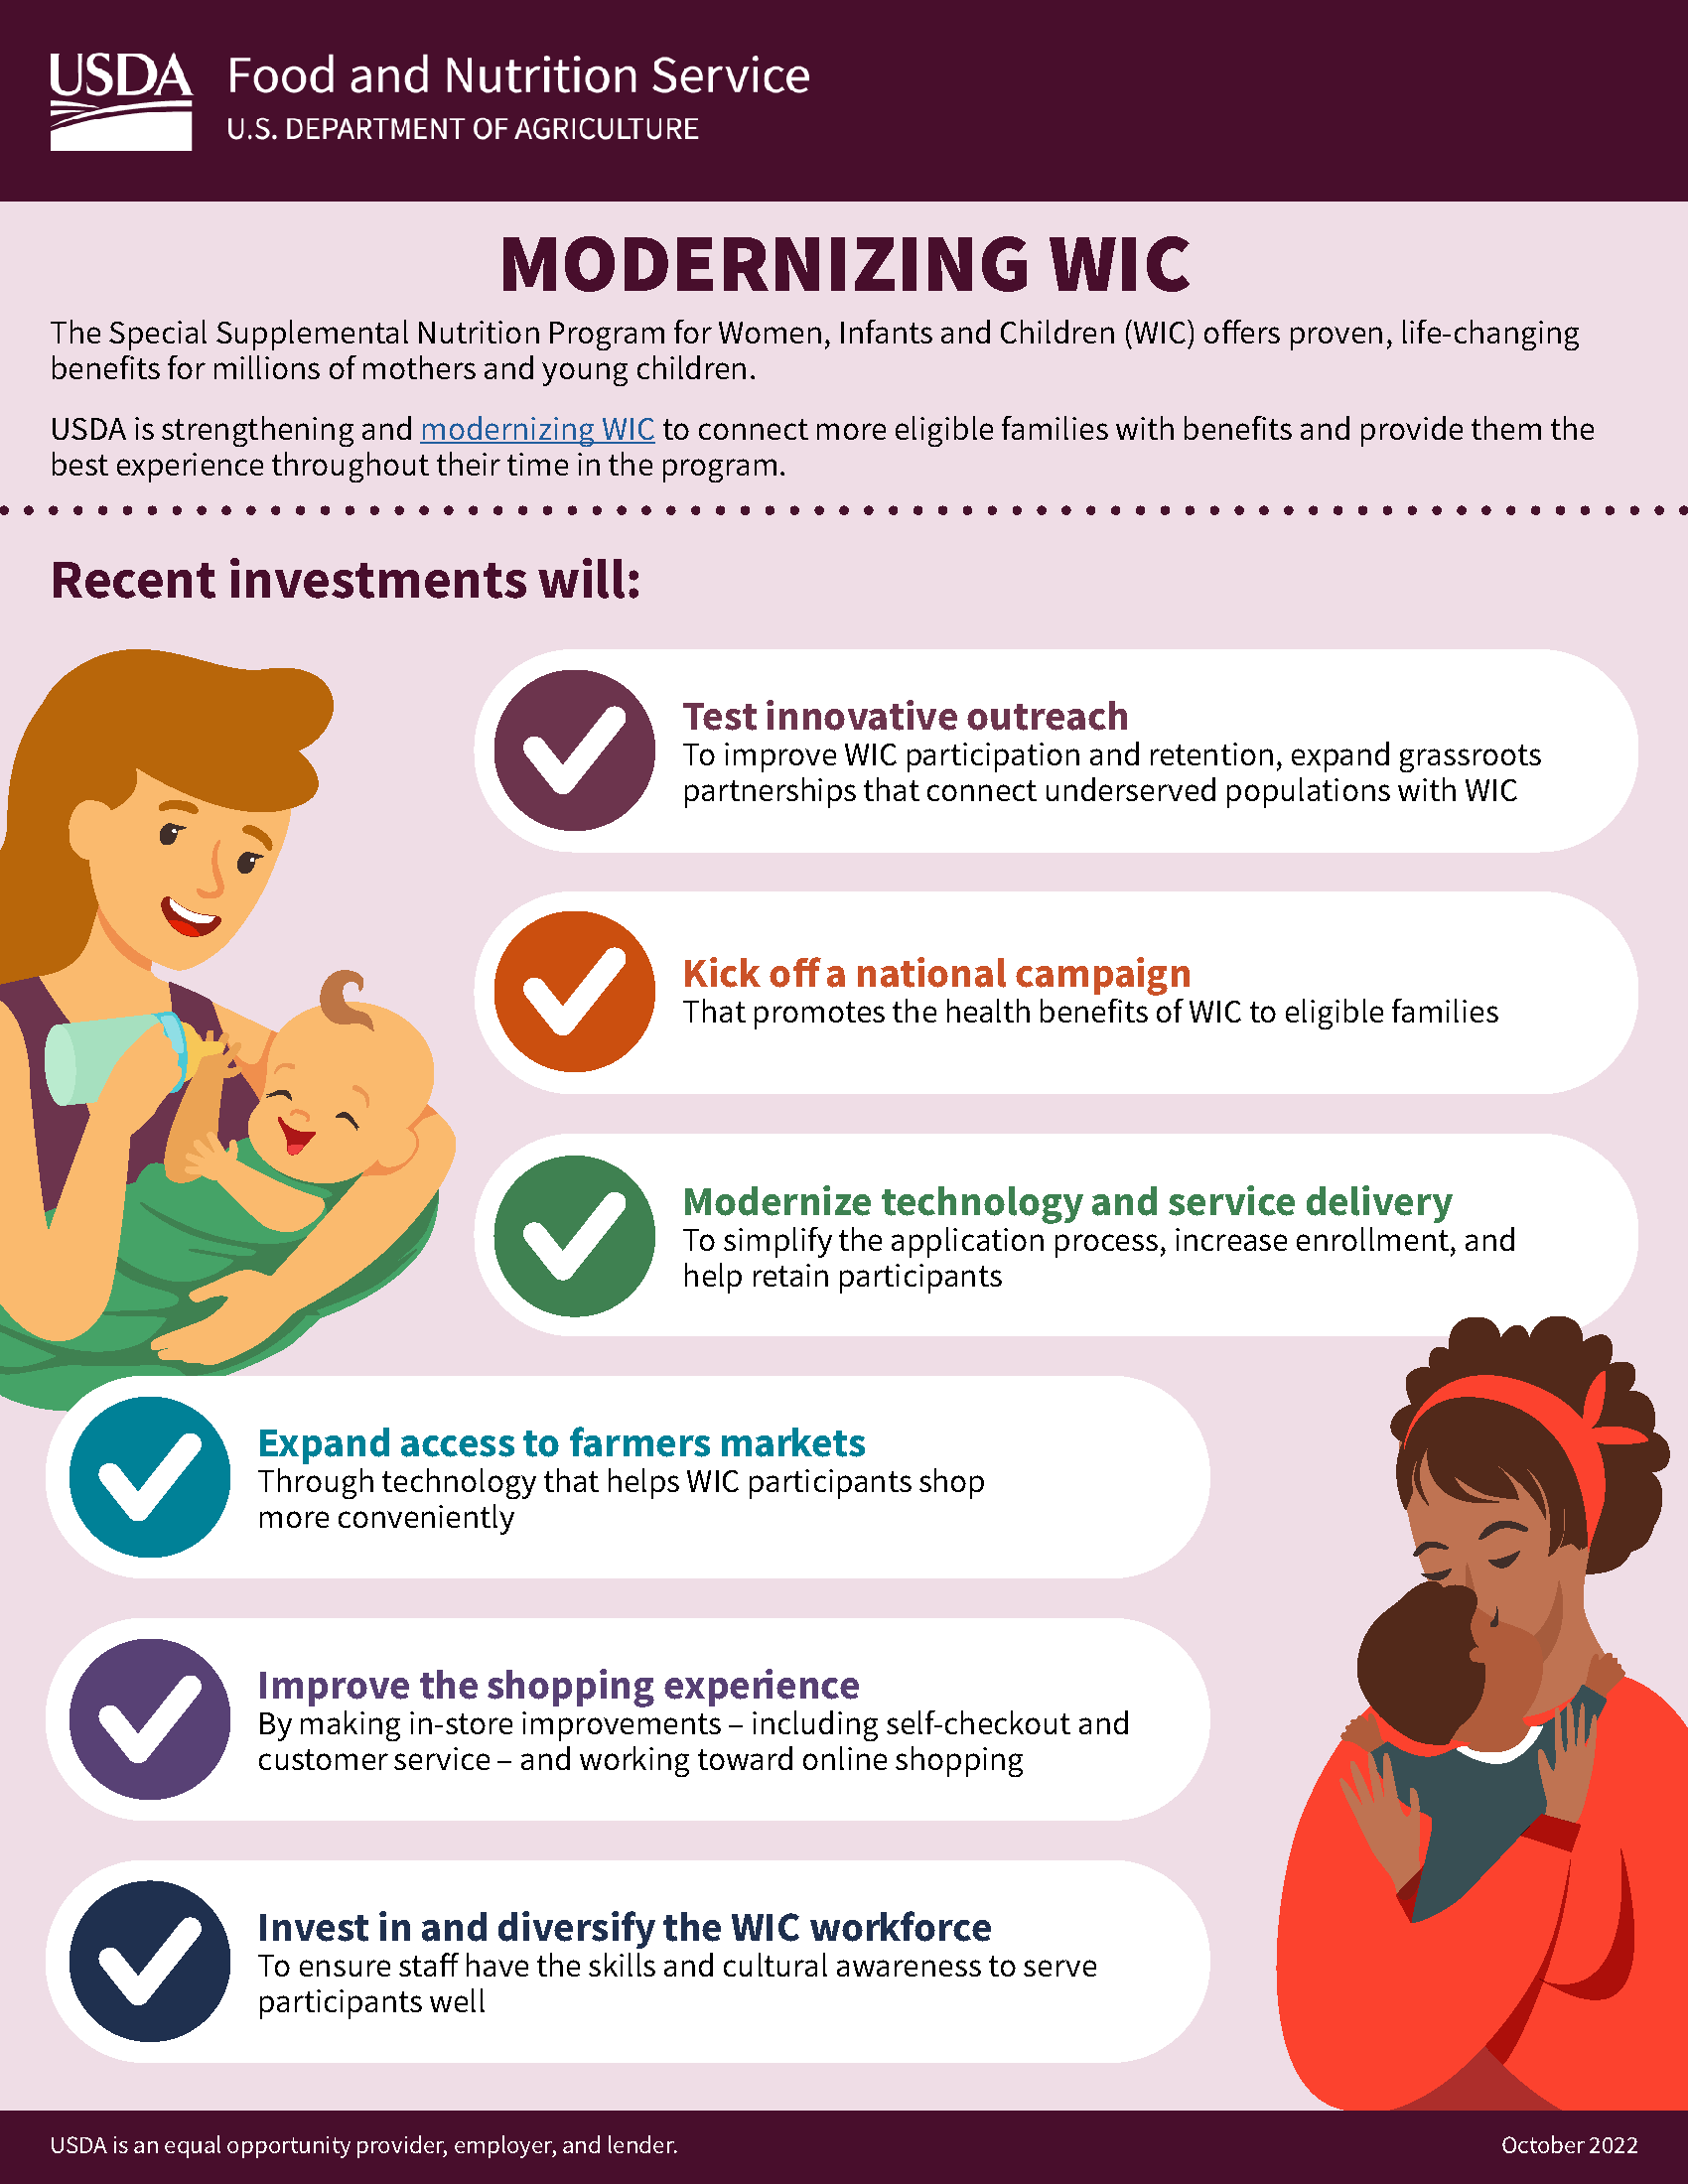 USDA Makes Major Investments in WIC to Improve Maternal and Child Health